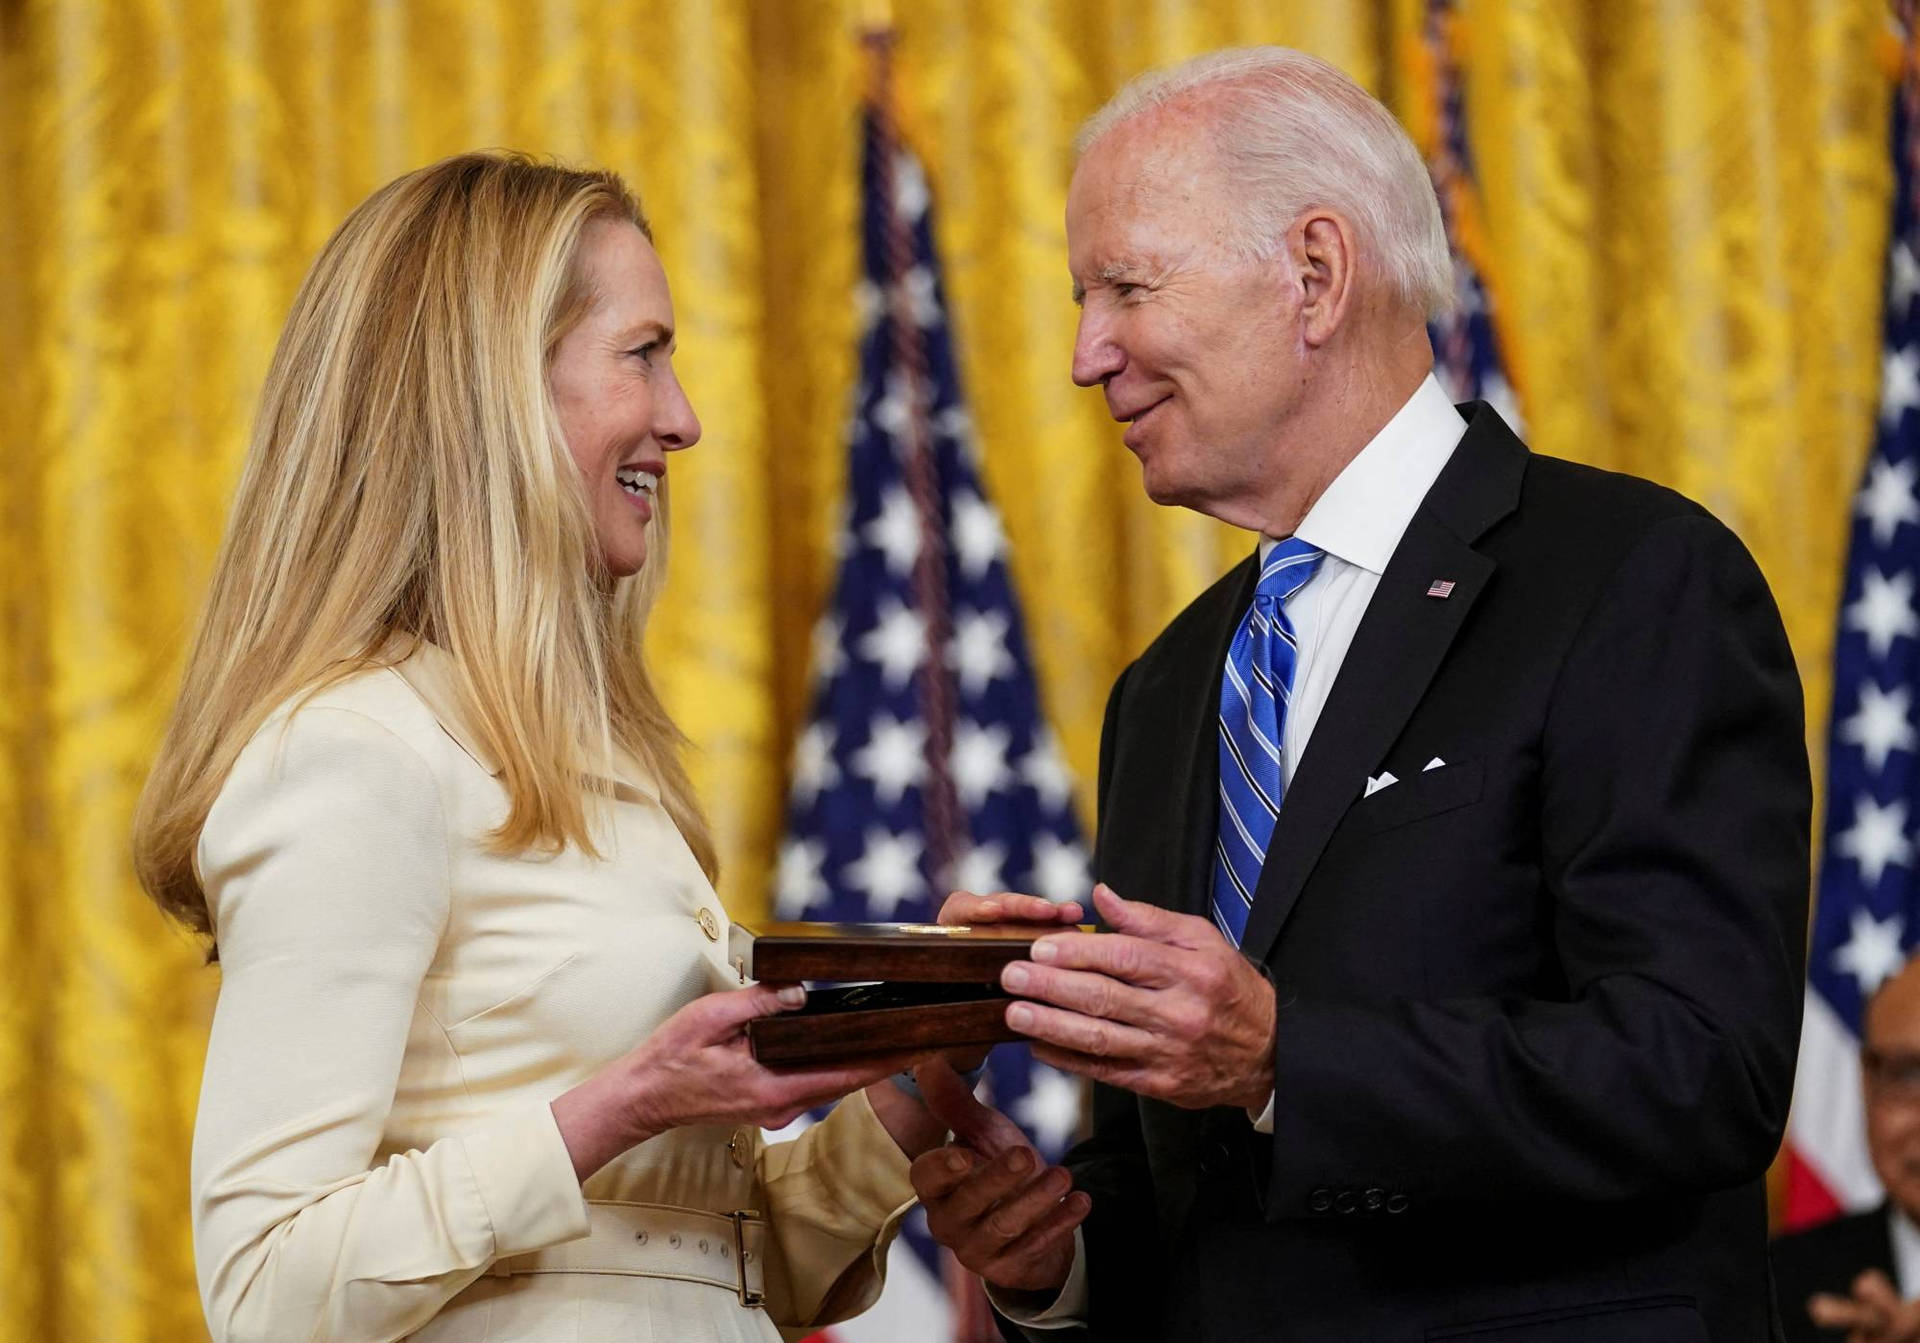 Laurenepowell Jobs Och Joe Biden (could Be A Wallpaper Design With Their Pictures Or Names) Wallpaper